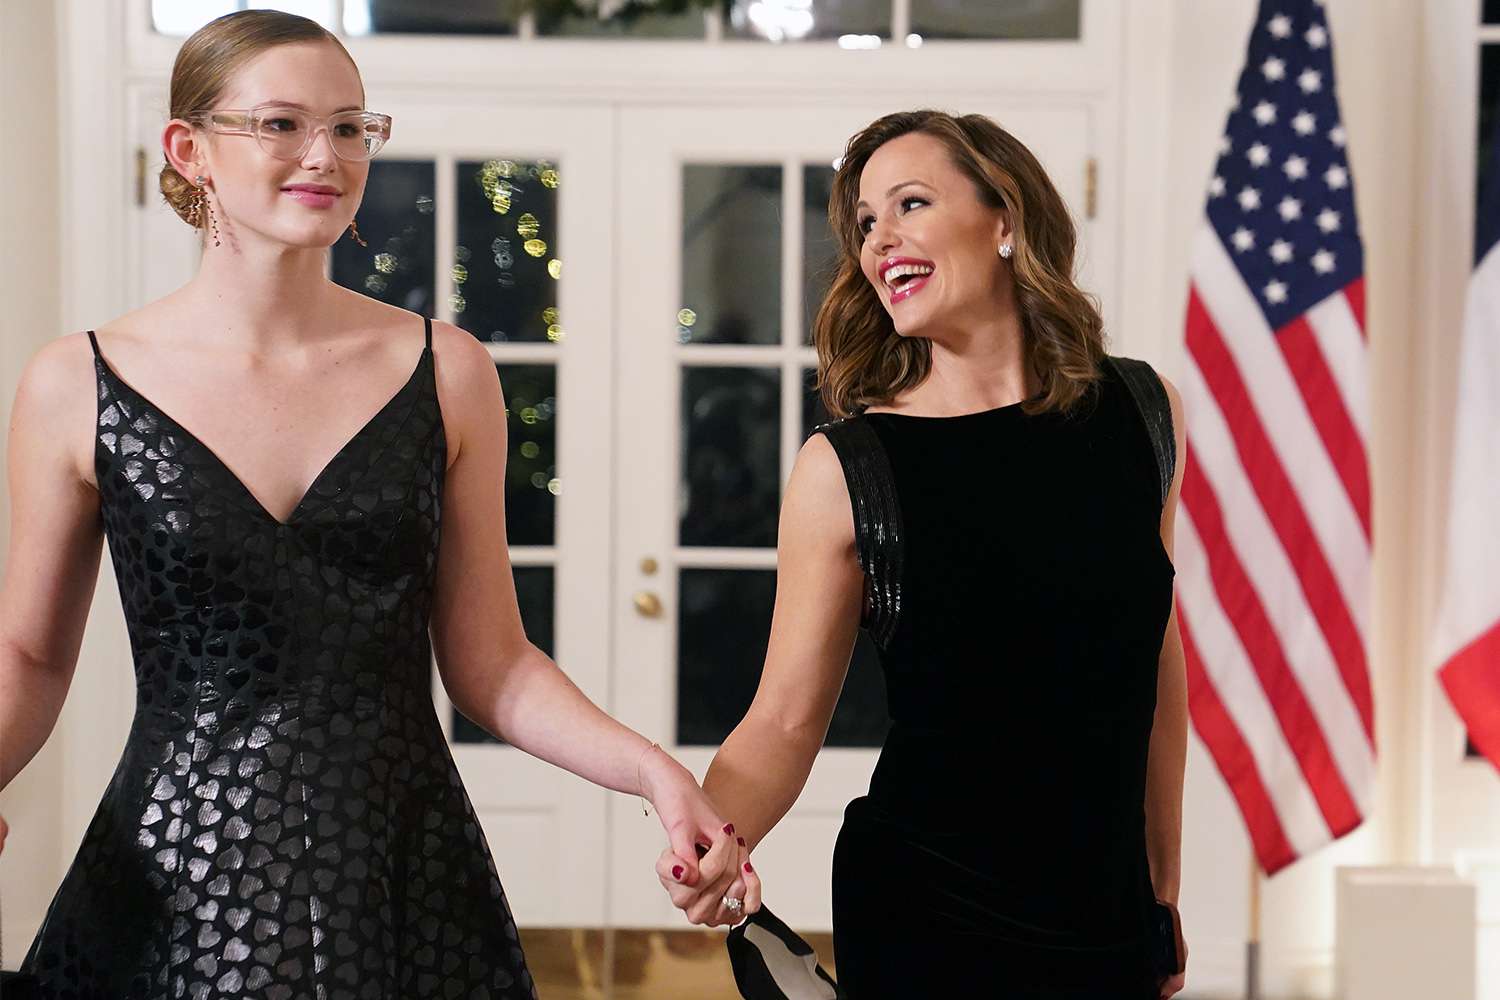 WASHINGTON, DC - DECEMBER 01: Actress Jennifer Garner and her daughter Violet arrive for the White House state dinner for French President Emmanuel Macron at the White House on December 1, 2022 in Washington, DC. The official state visit is the first for the Biden administration. (Photo by Nathan Howard/Getty Images)